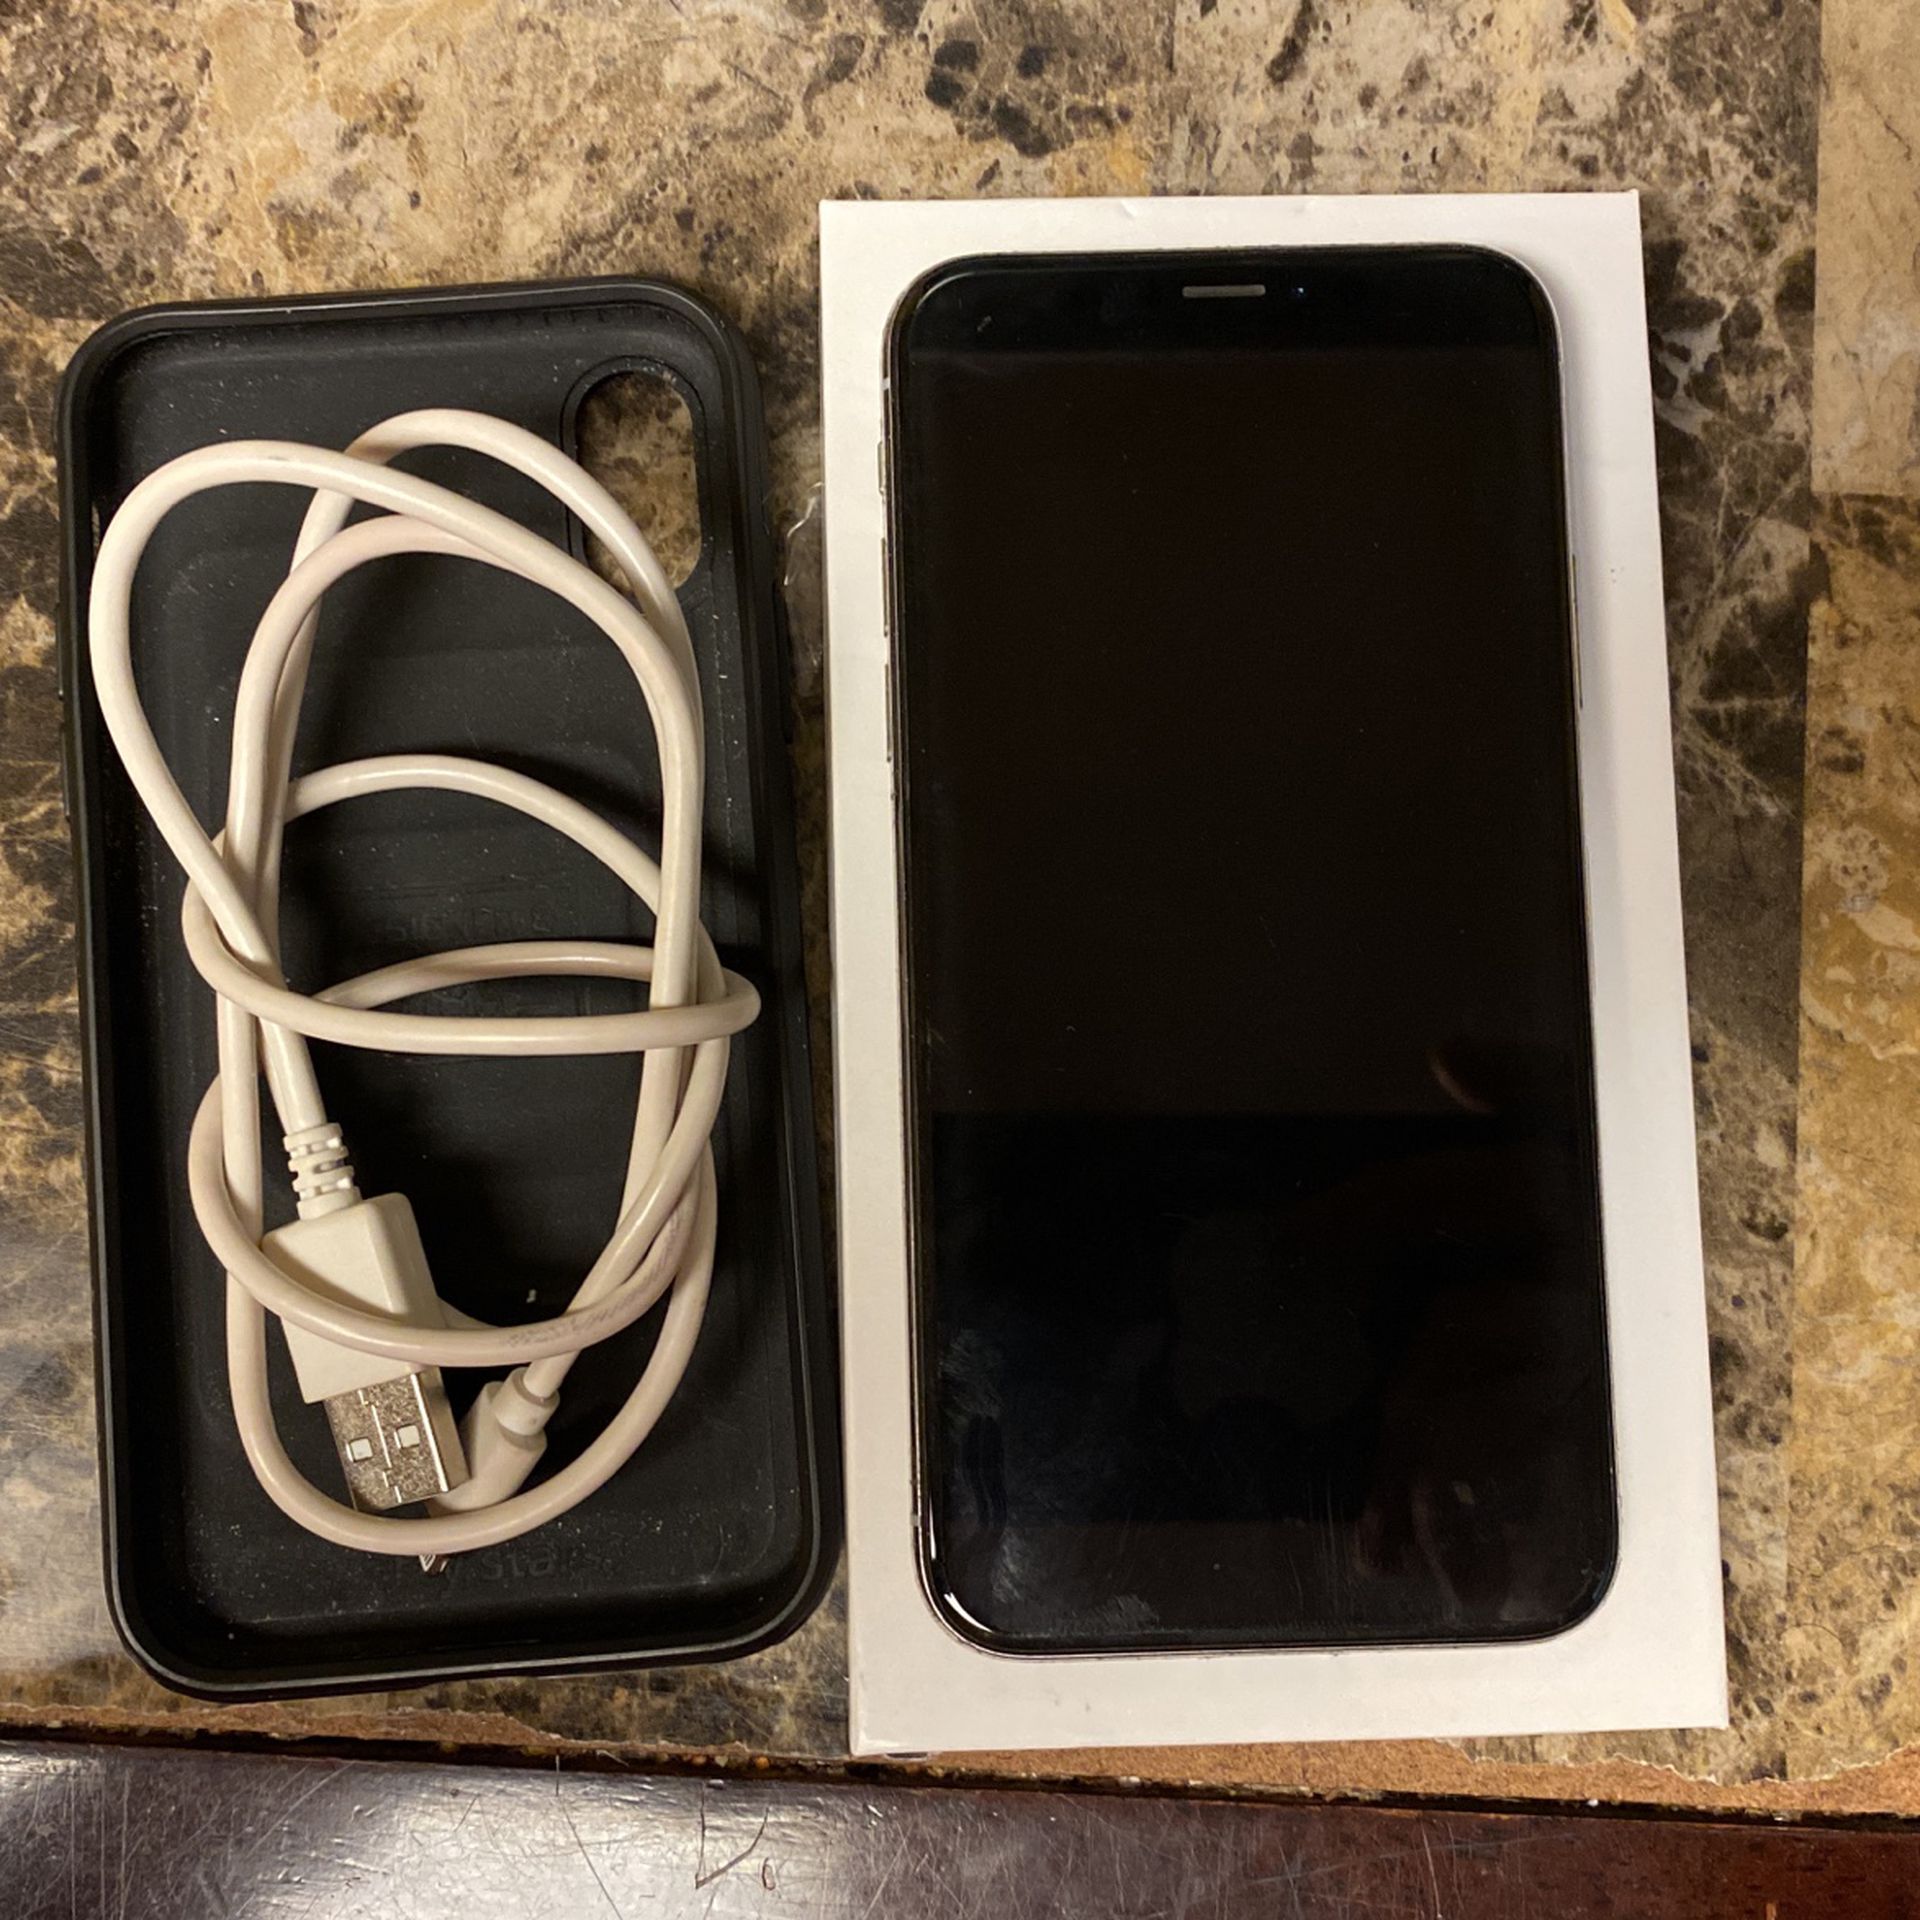 iPhone X 64bg T-mobile (charger, Case) 225 Obo 